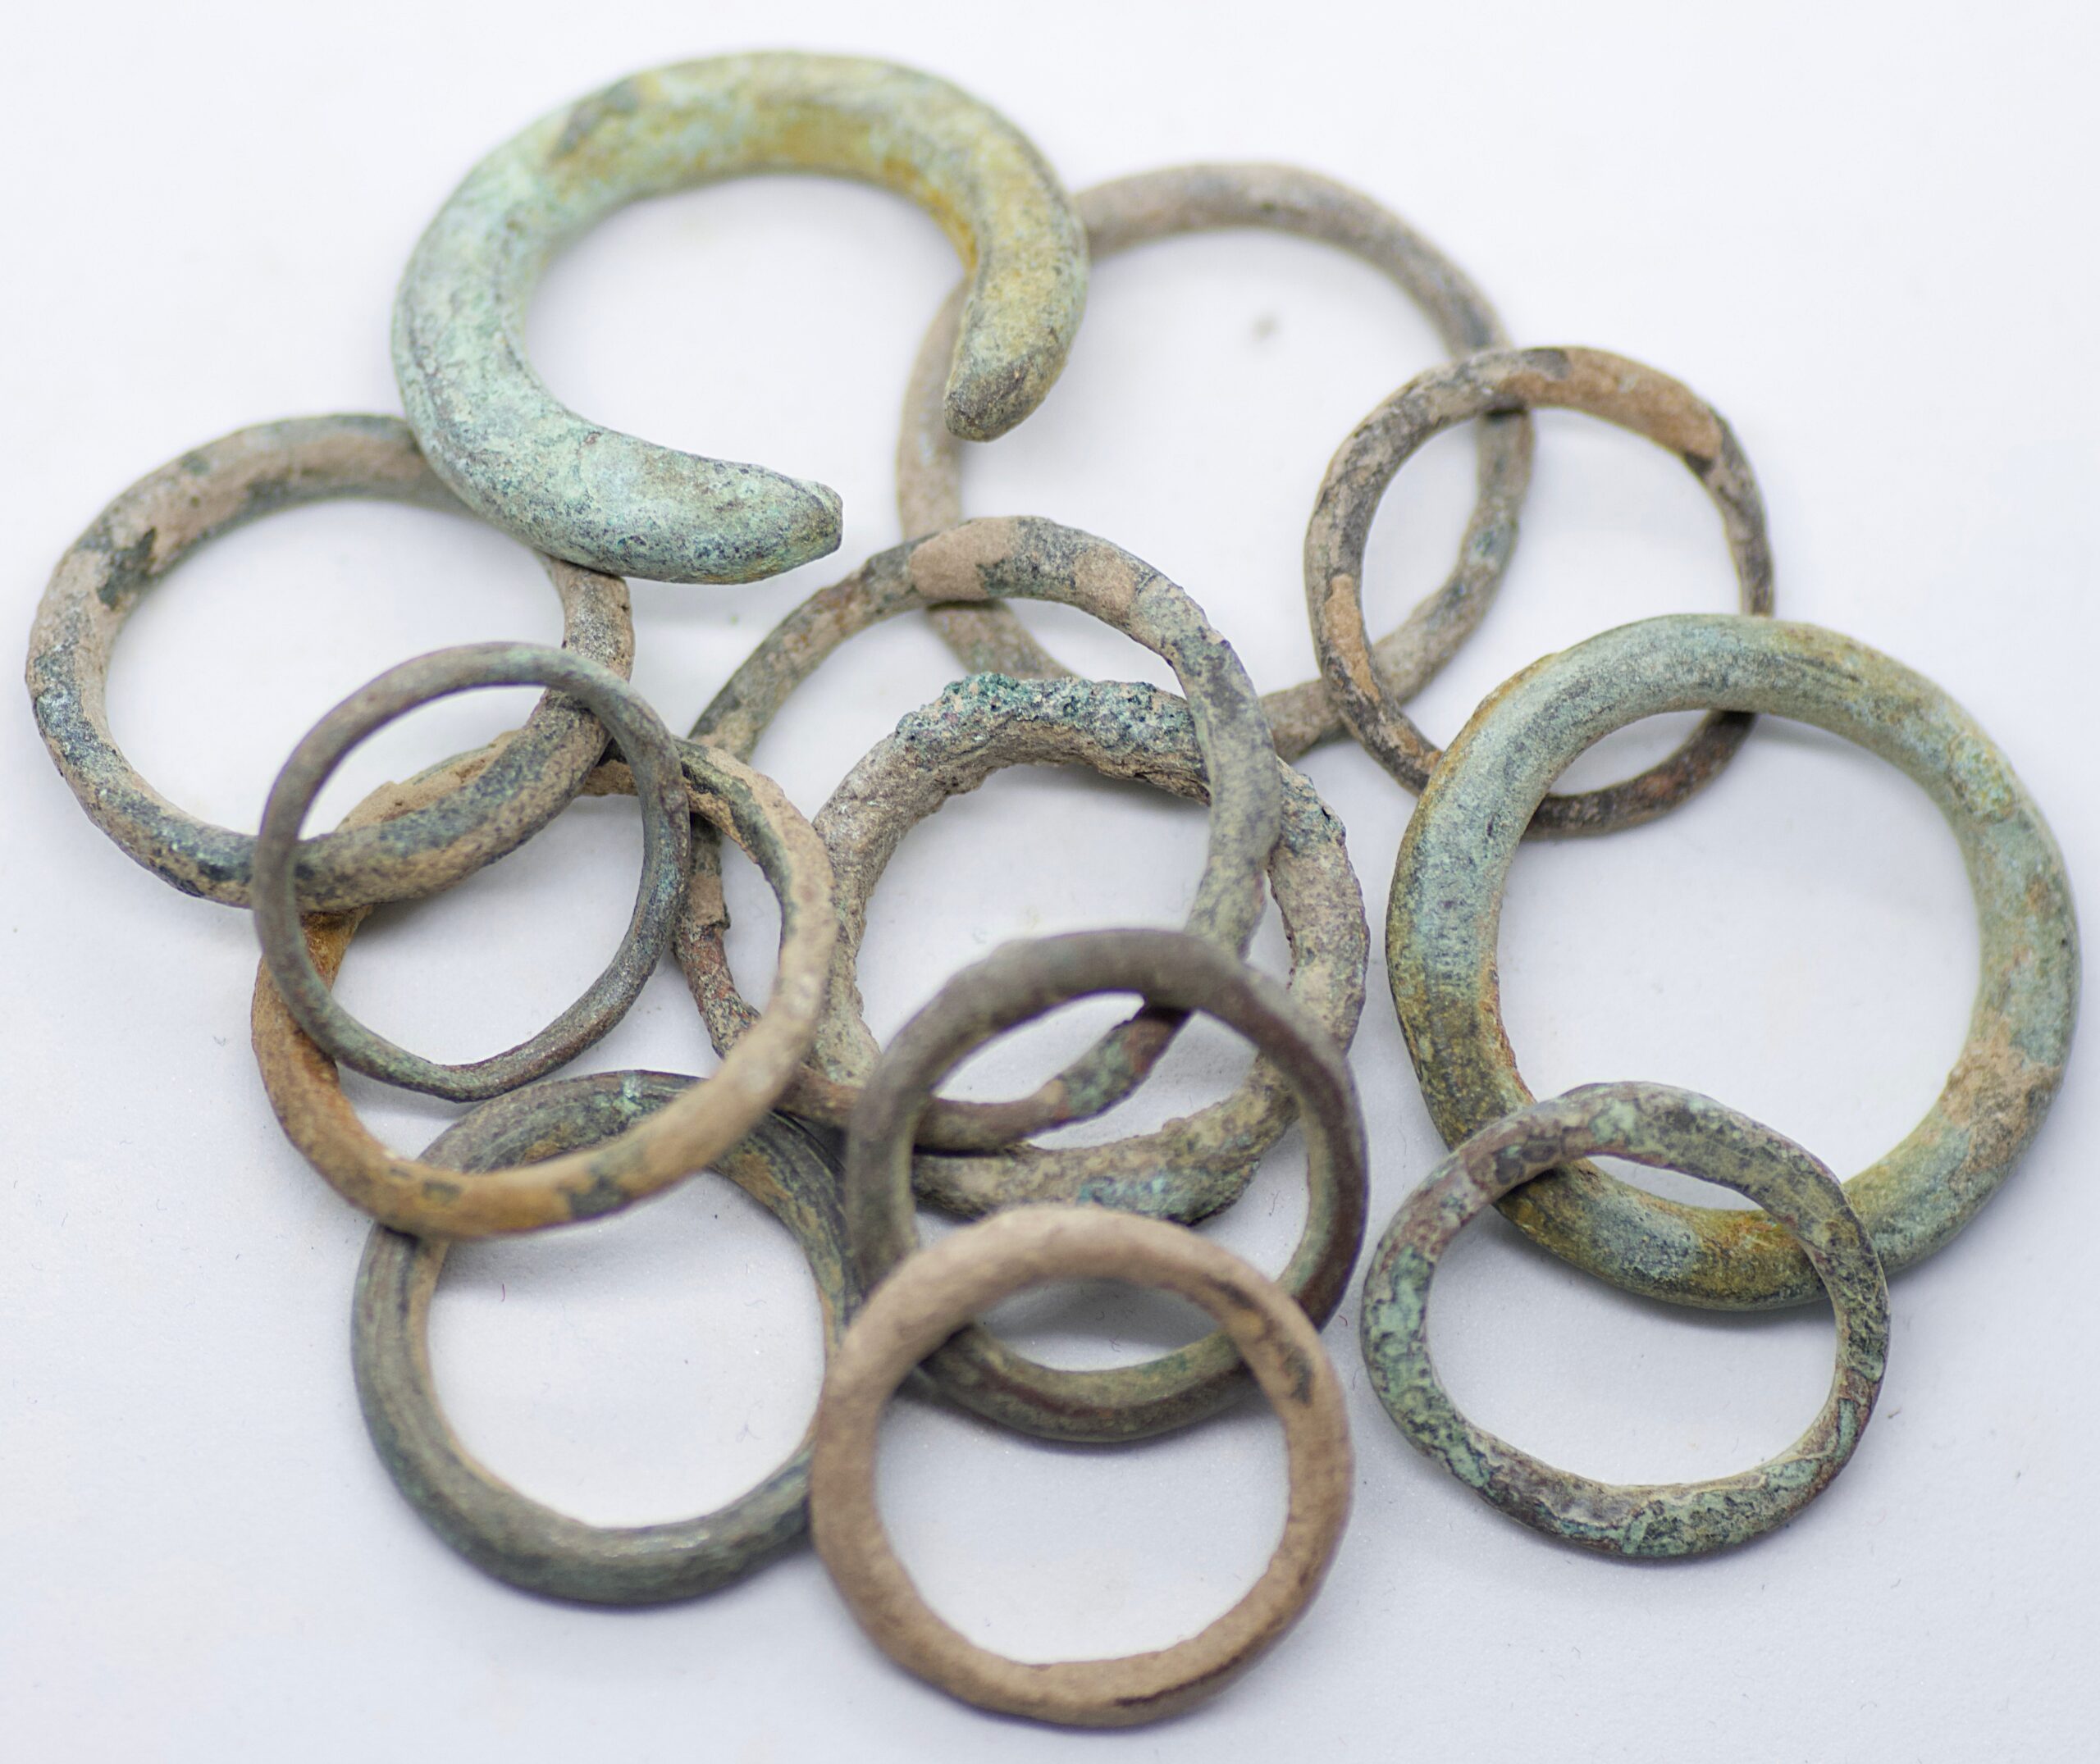 Group of 13 Bronze Ancient rings and earrings